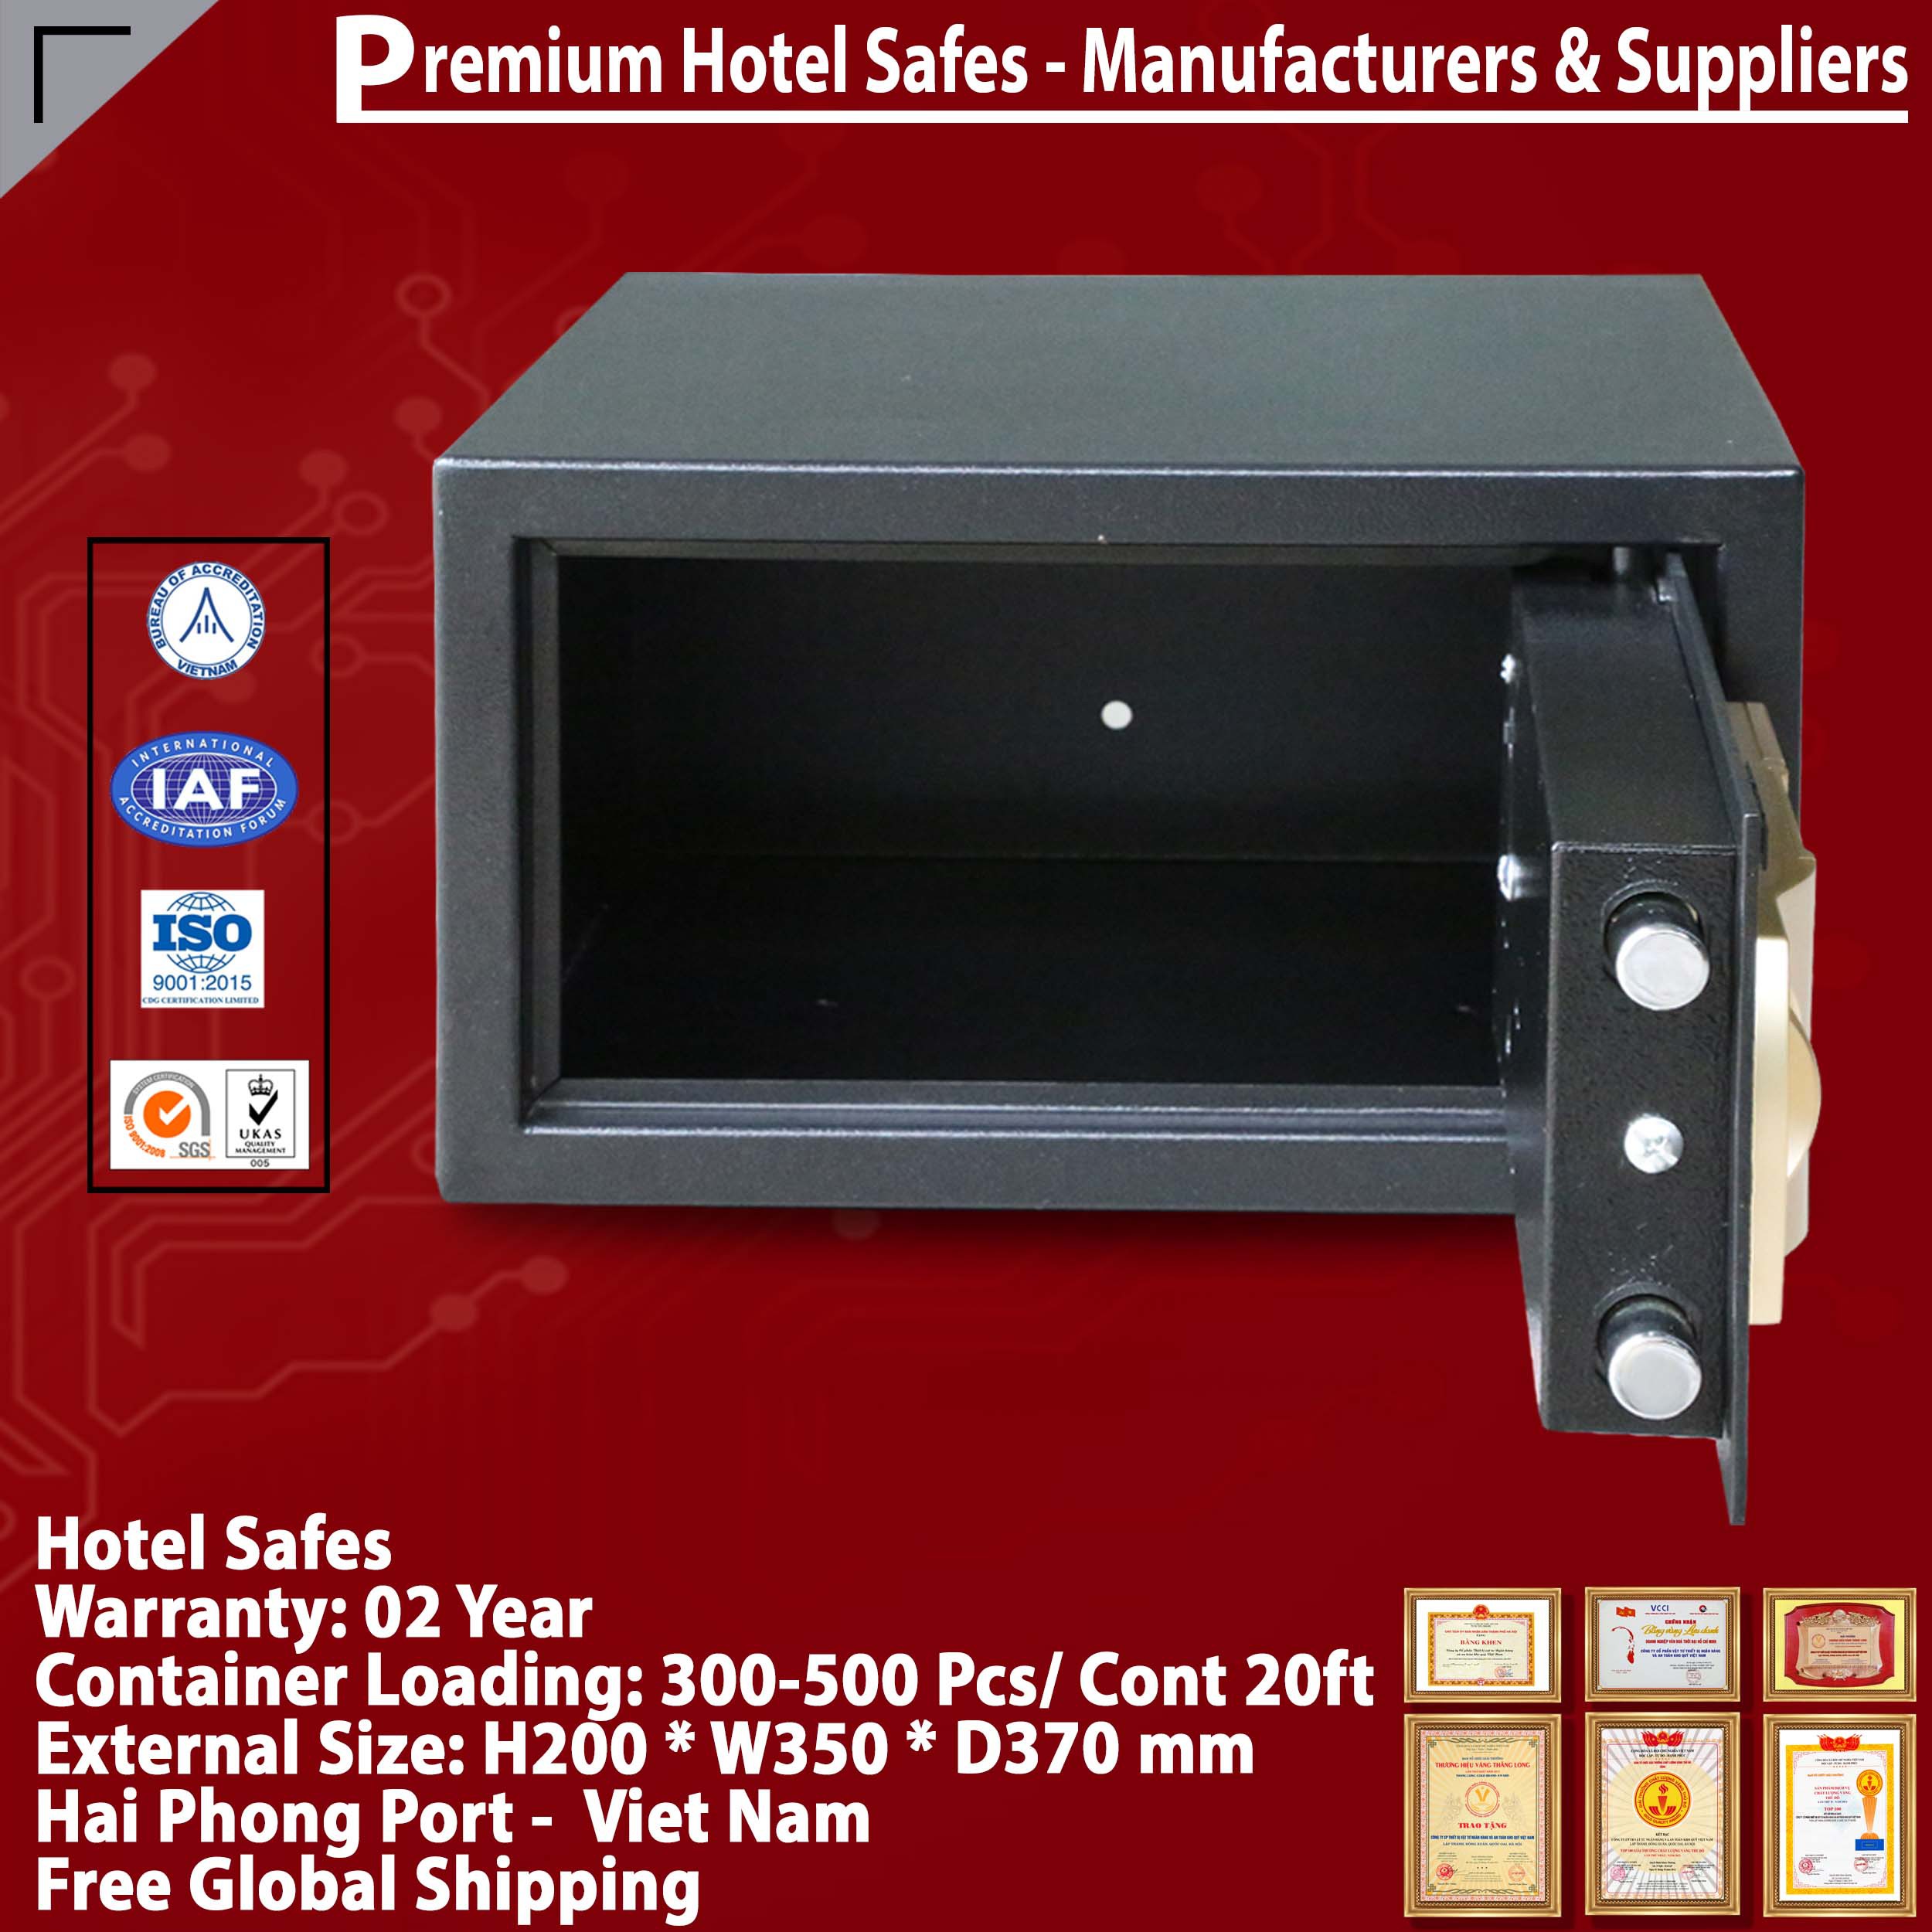 Best Sellers In Hotel Safes Made In Viet Nam